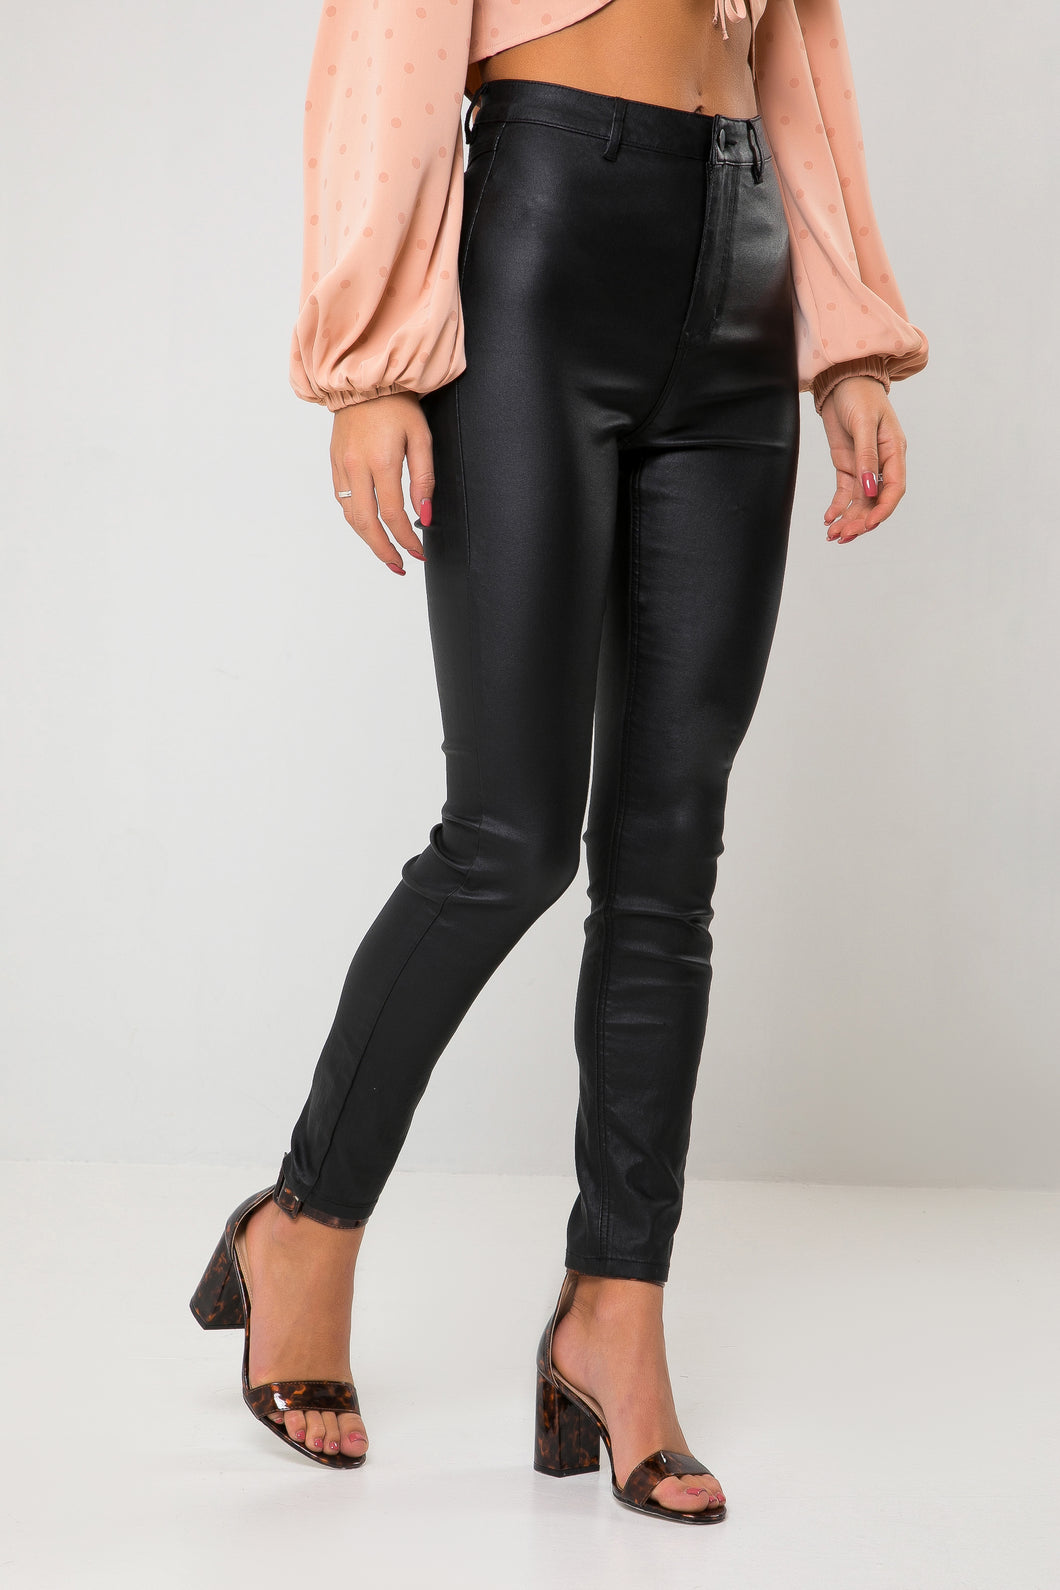 Urban Bliss - High Waisted Skinny Stretch Disco Jeans